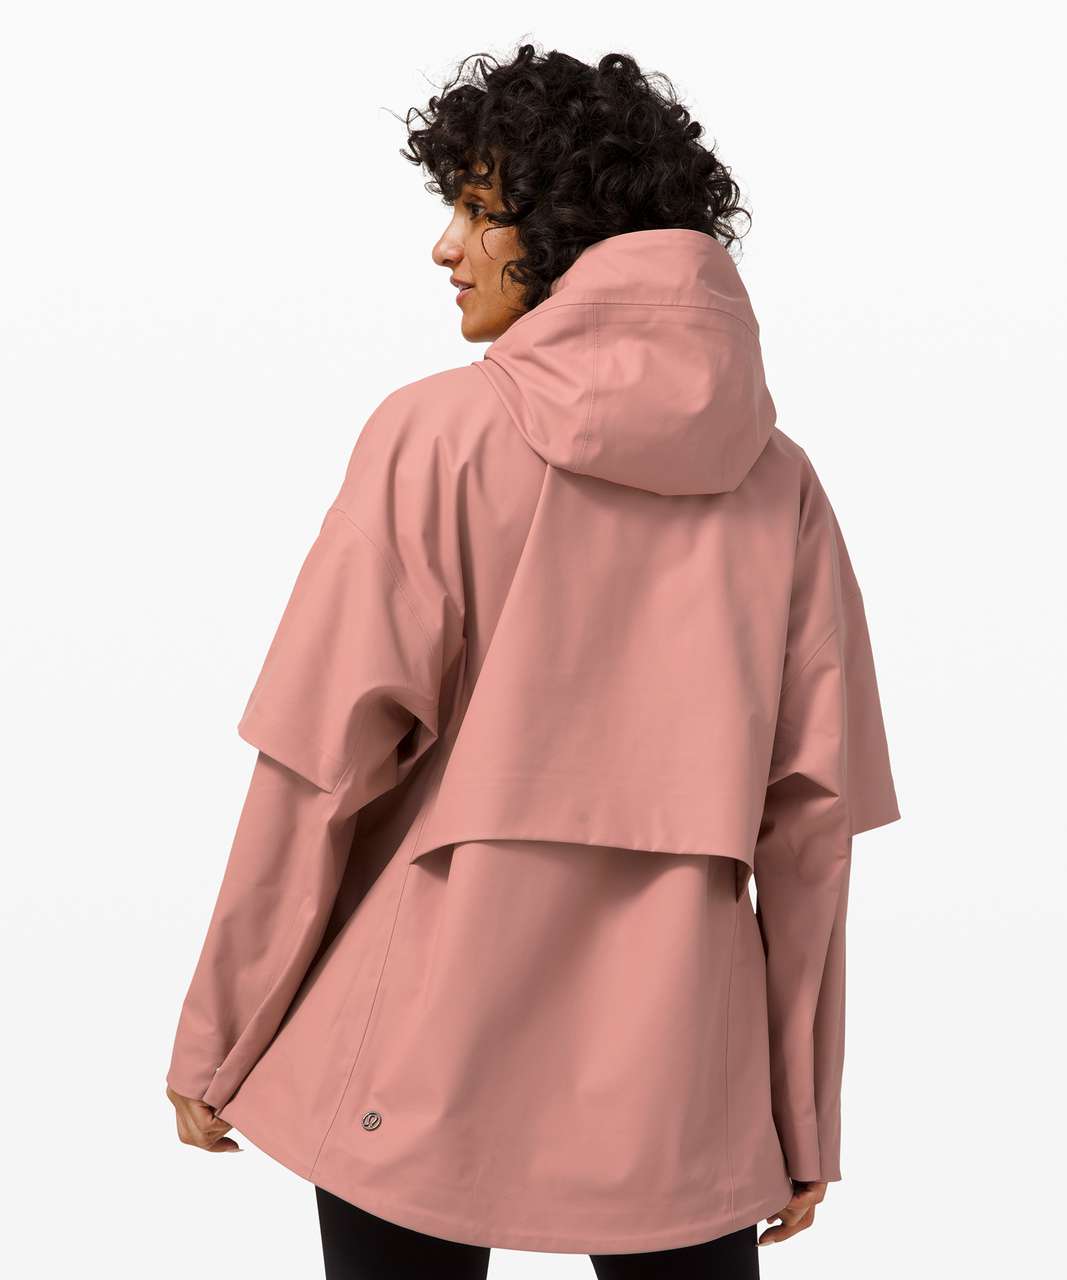 Lululemon Into the Drizzle 1/2 Zip Jacket - Chalky Rose